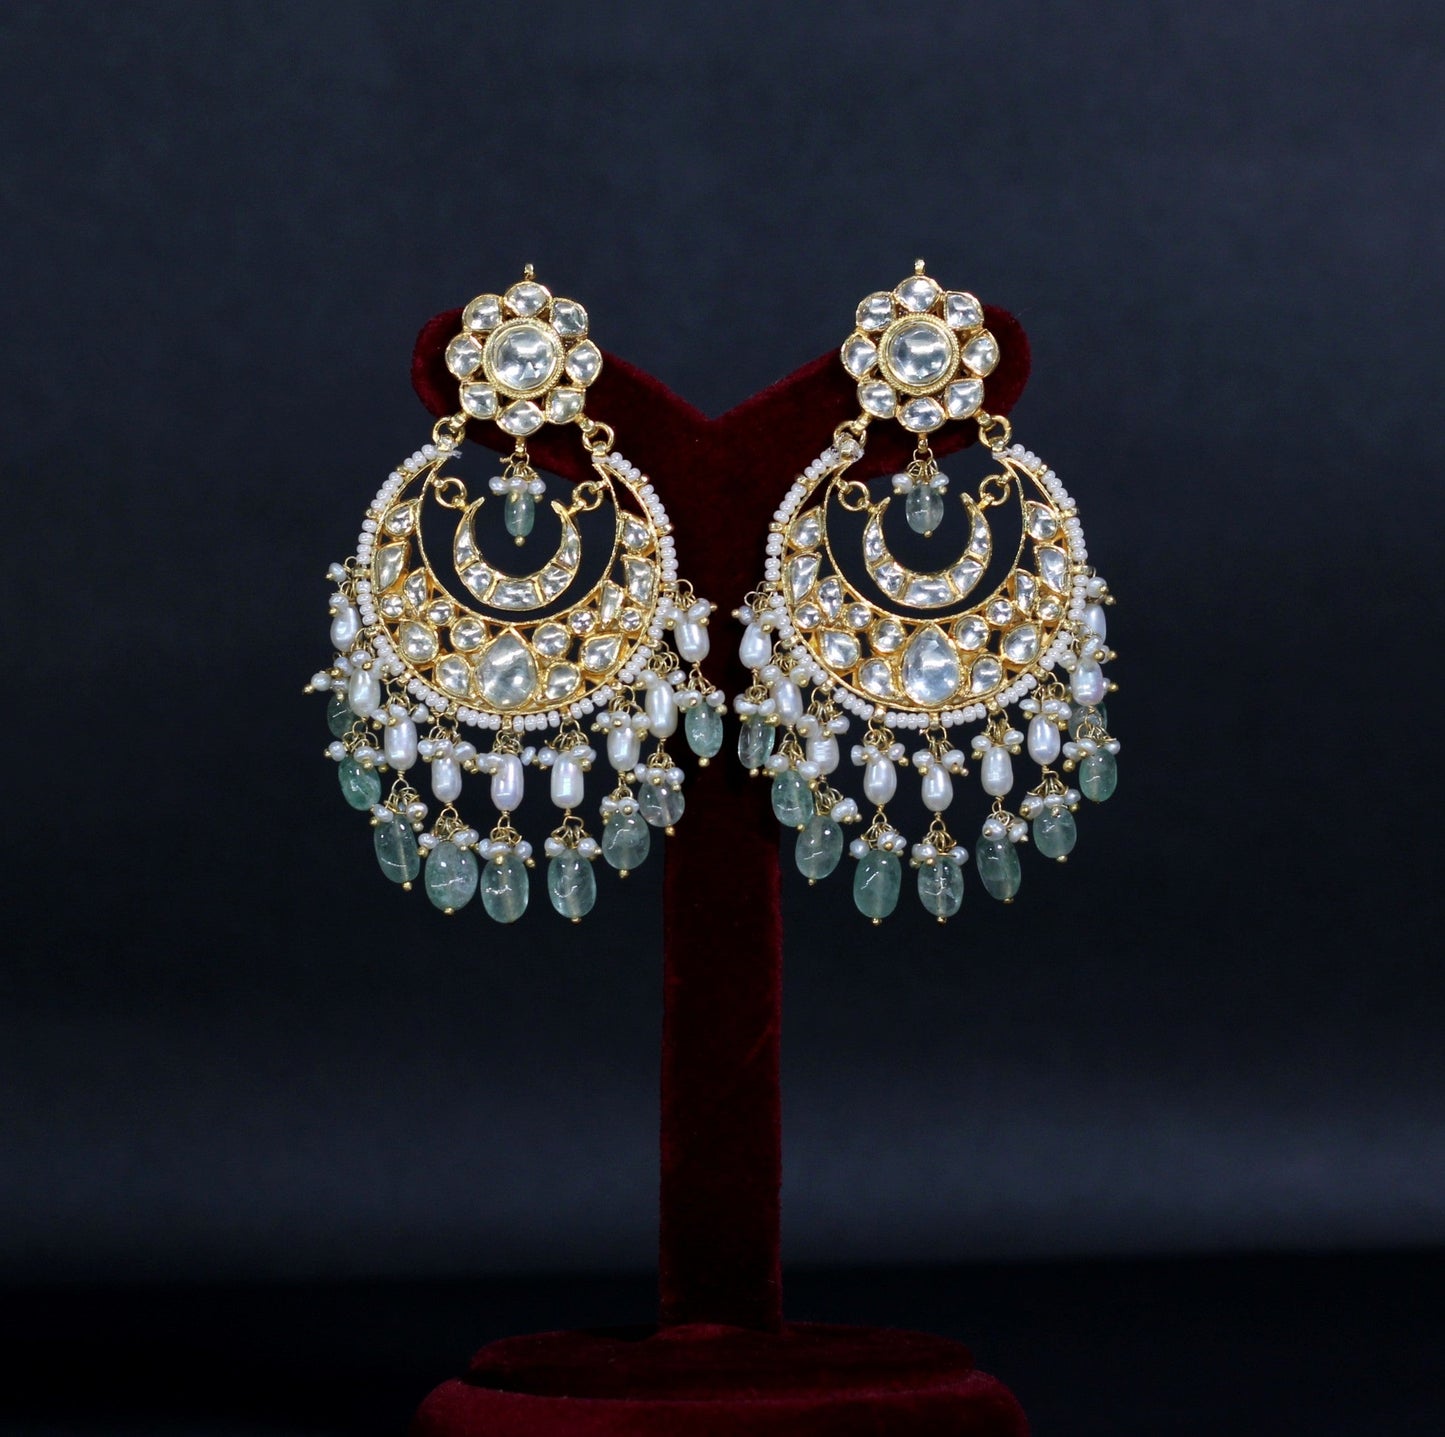 EARRINGS IN 92.5 STERLING SILVER WITH 18KT GOLD PLATED WITH POLKI ,fluorite stones AND FRESH WATER PEARLS